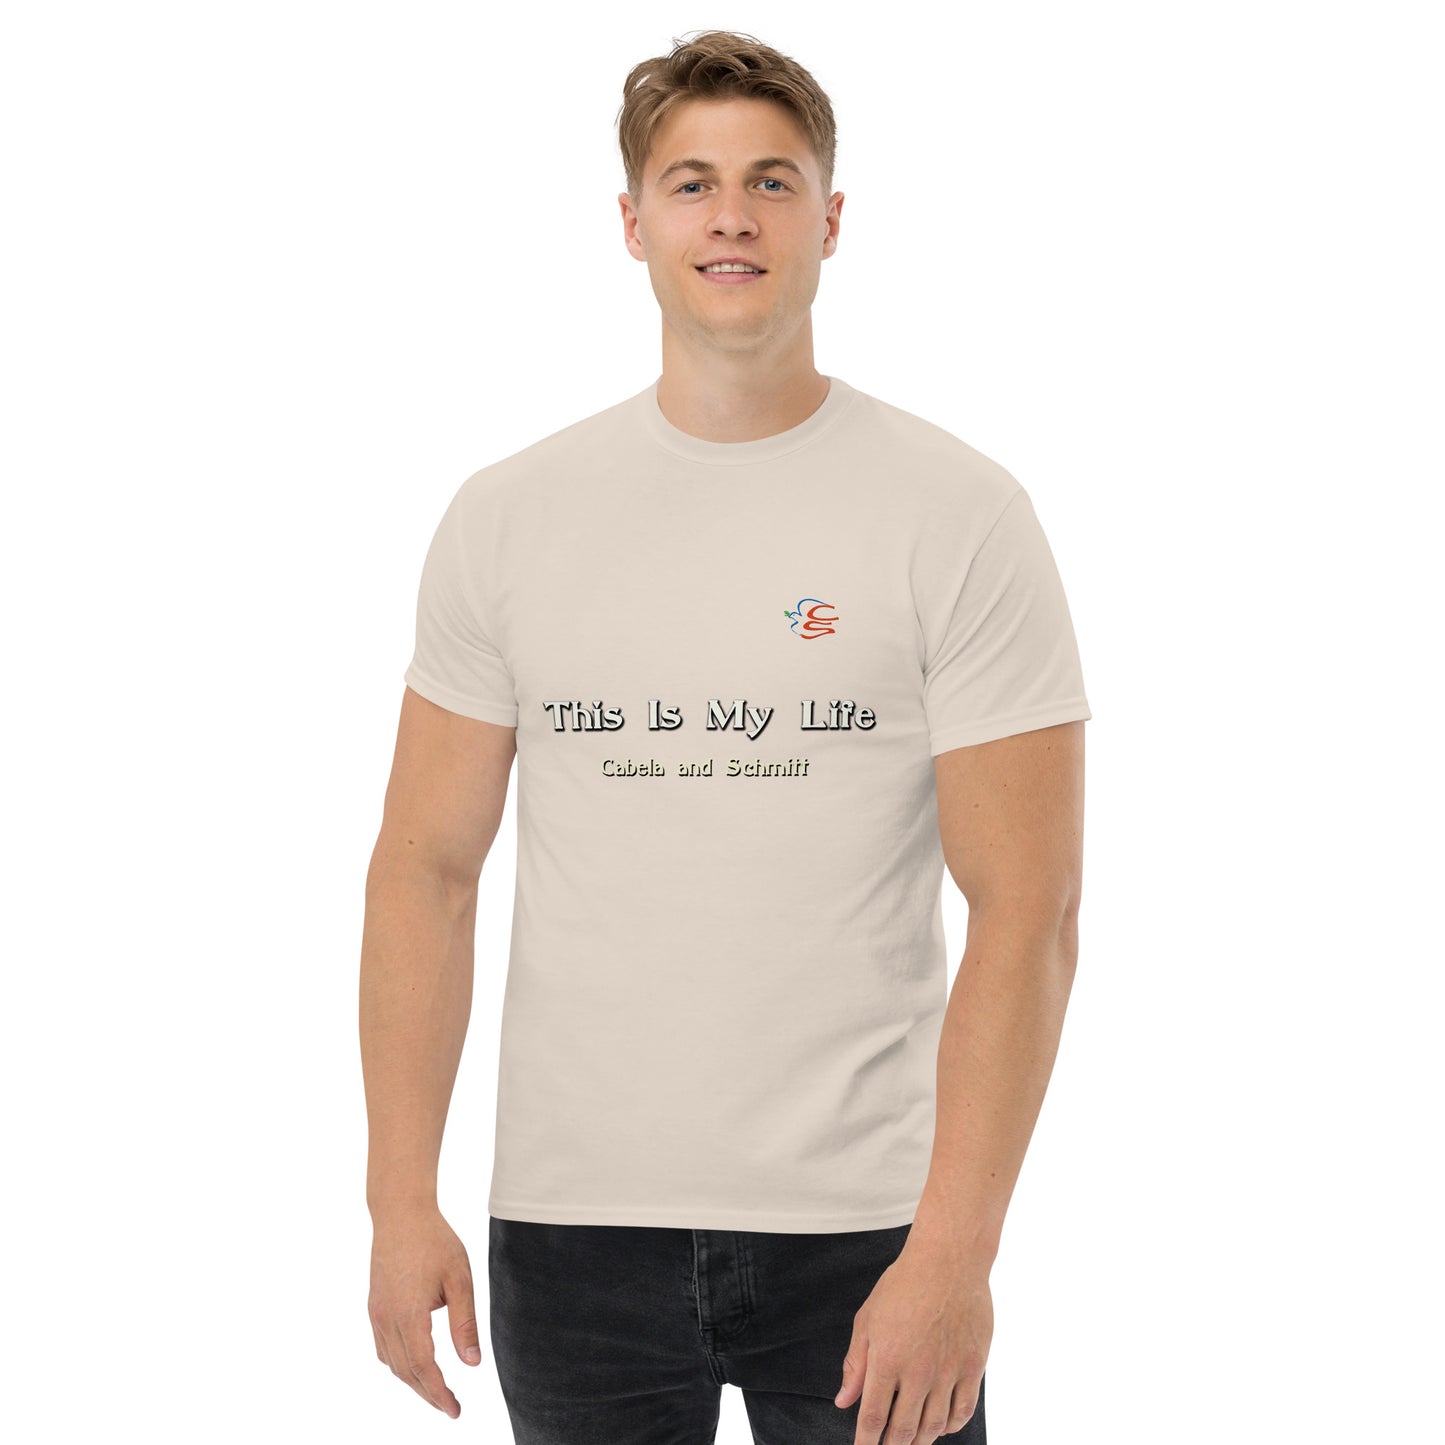 Men's classic tee "This Is My Life"